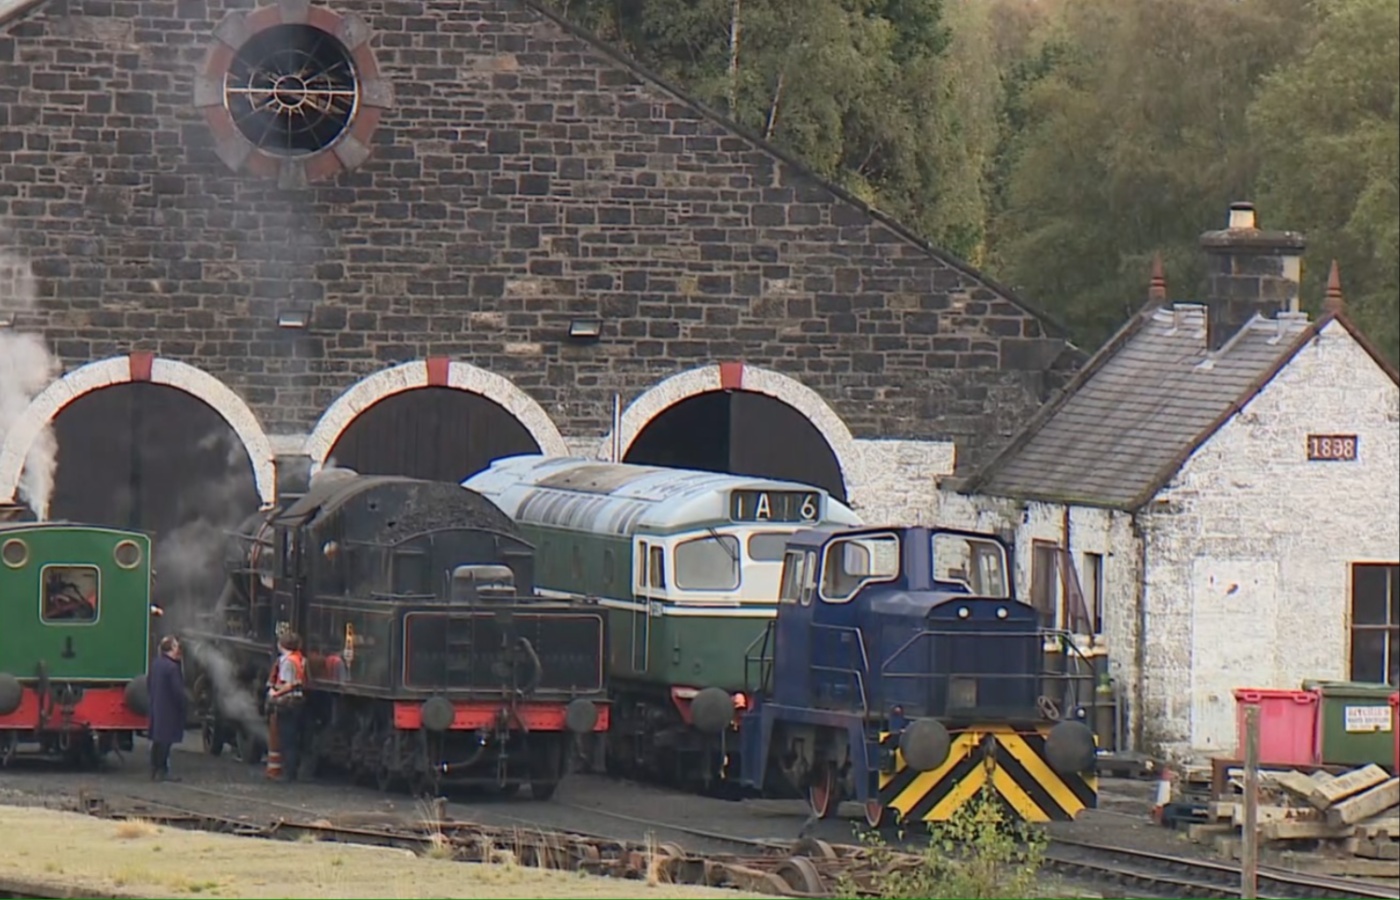 The shed is where the Flying Scotsman is getting checked over.